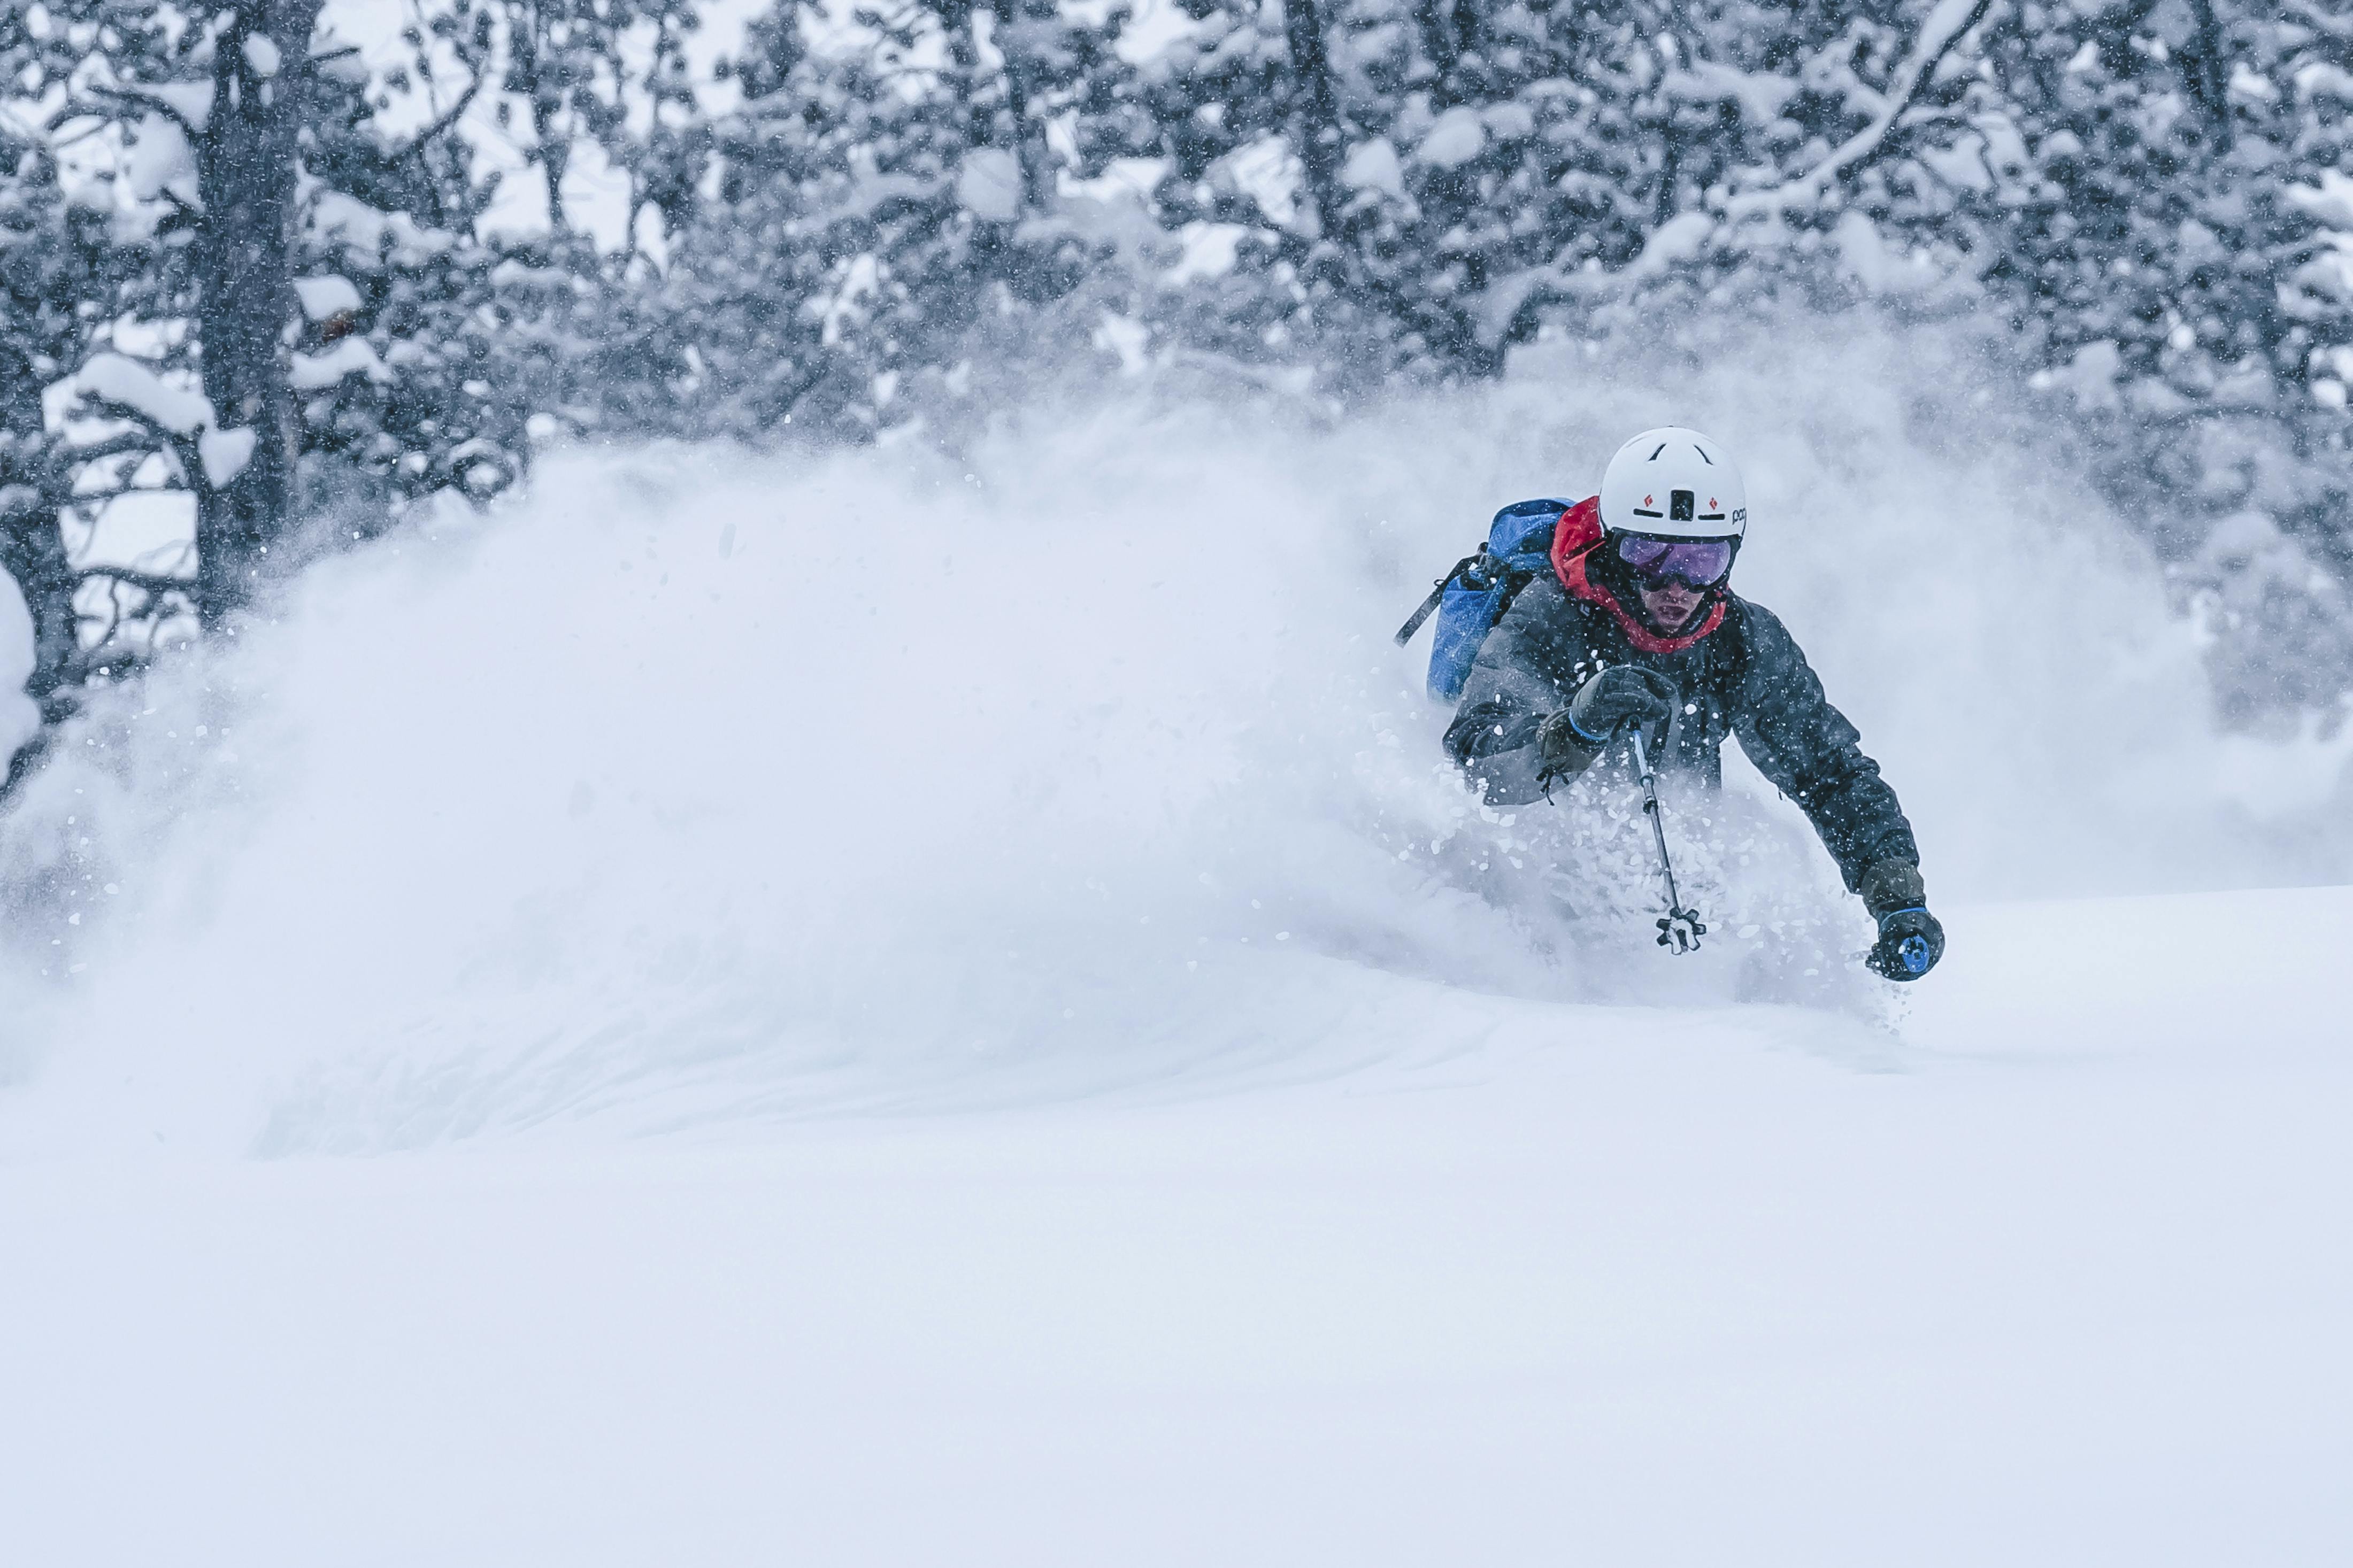 Black Diamond athlete Isaac Freeland laying powder trenches in the backcountry.